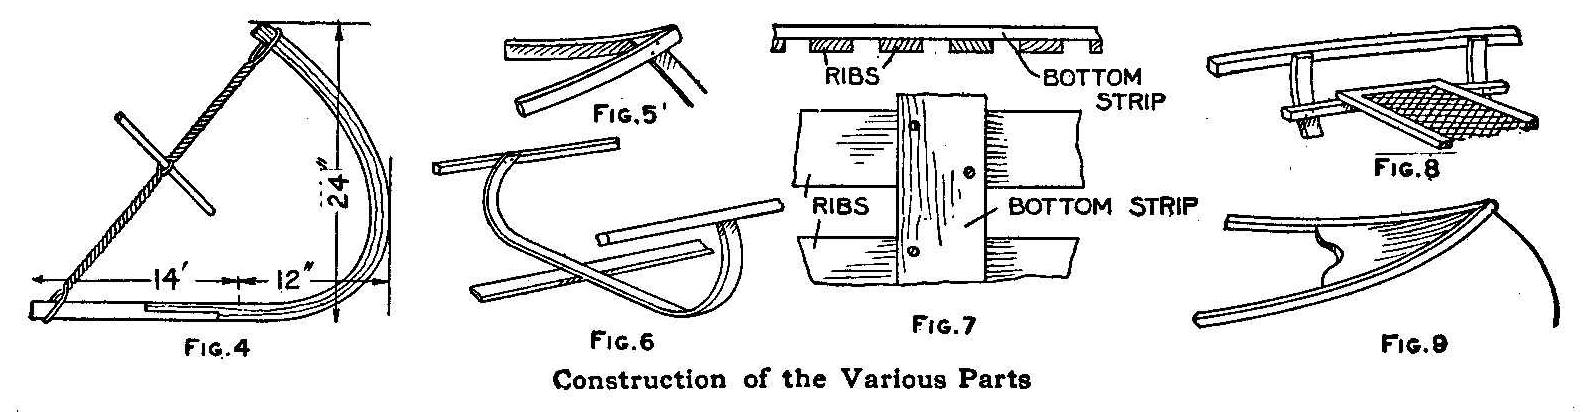 Construction of the Various Parts